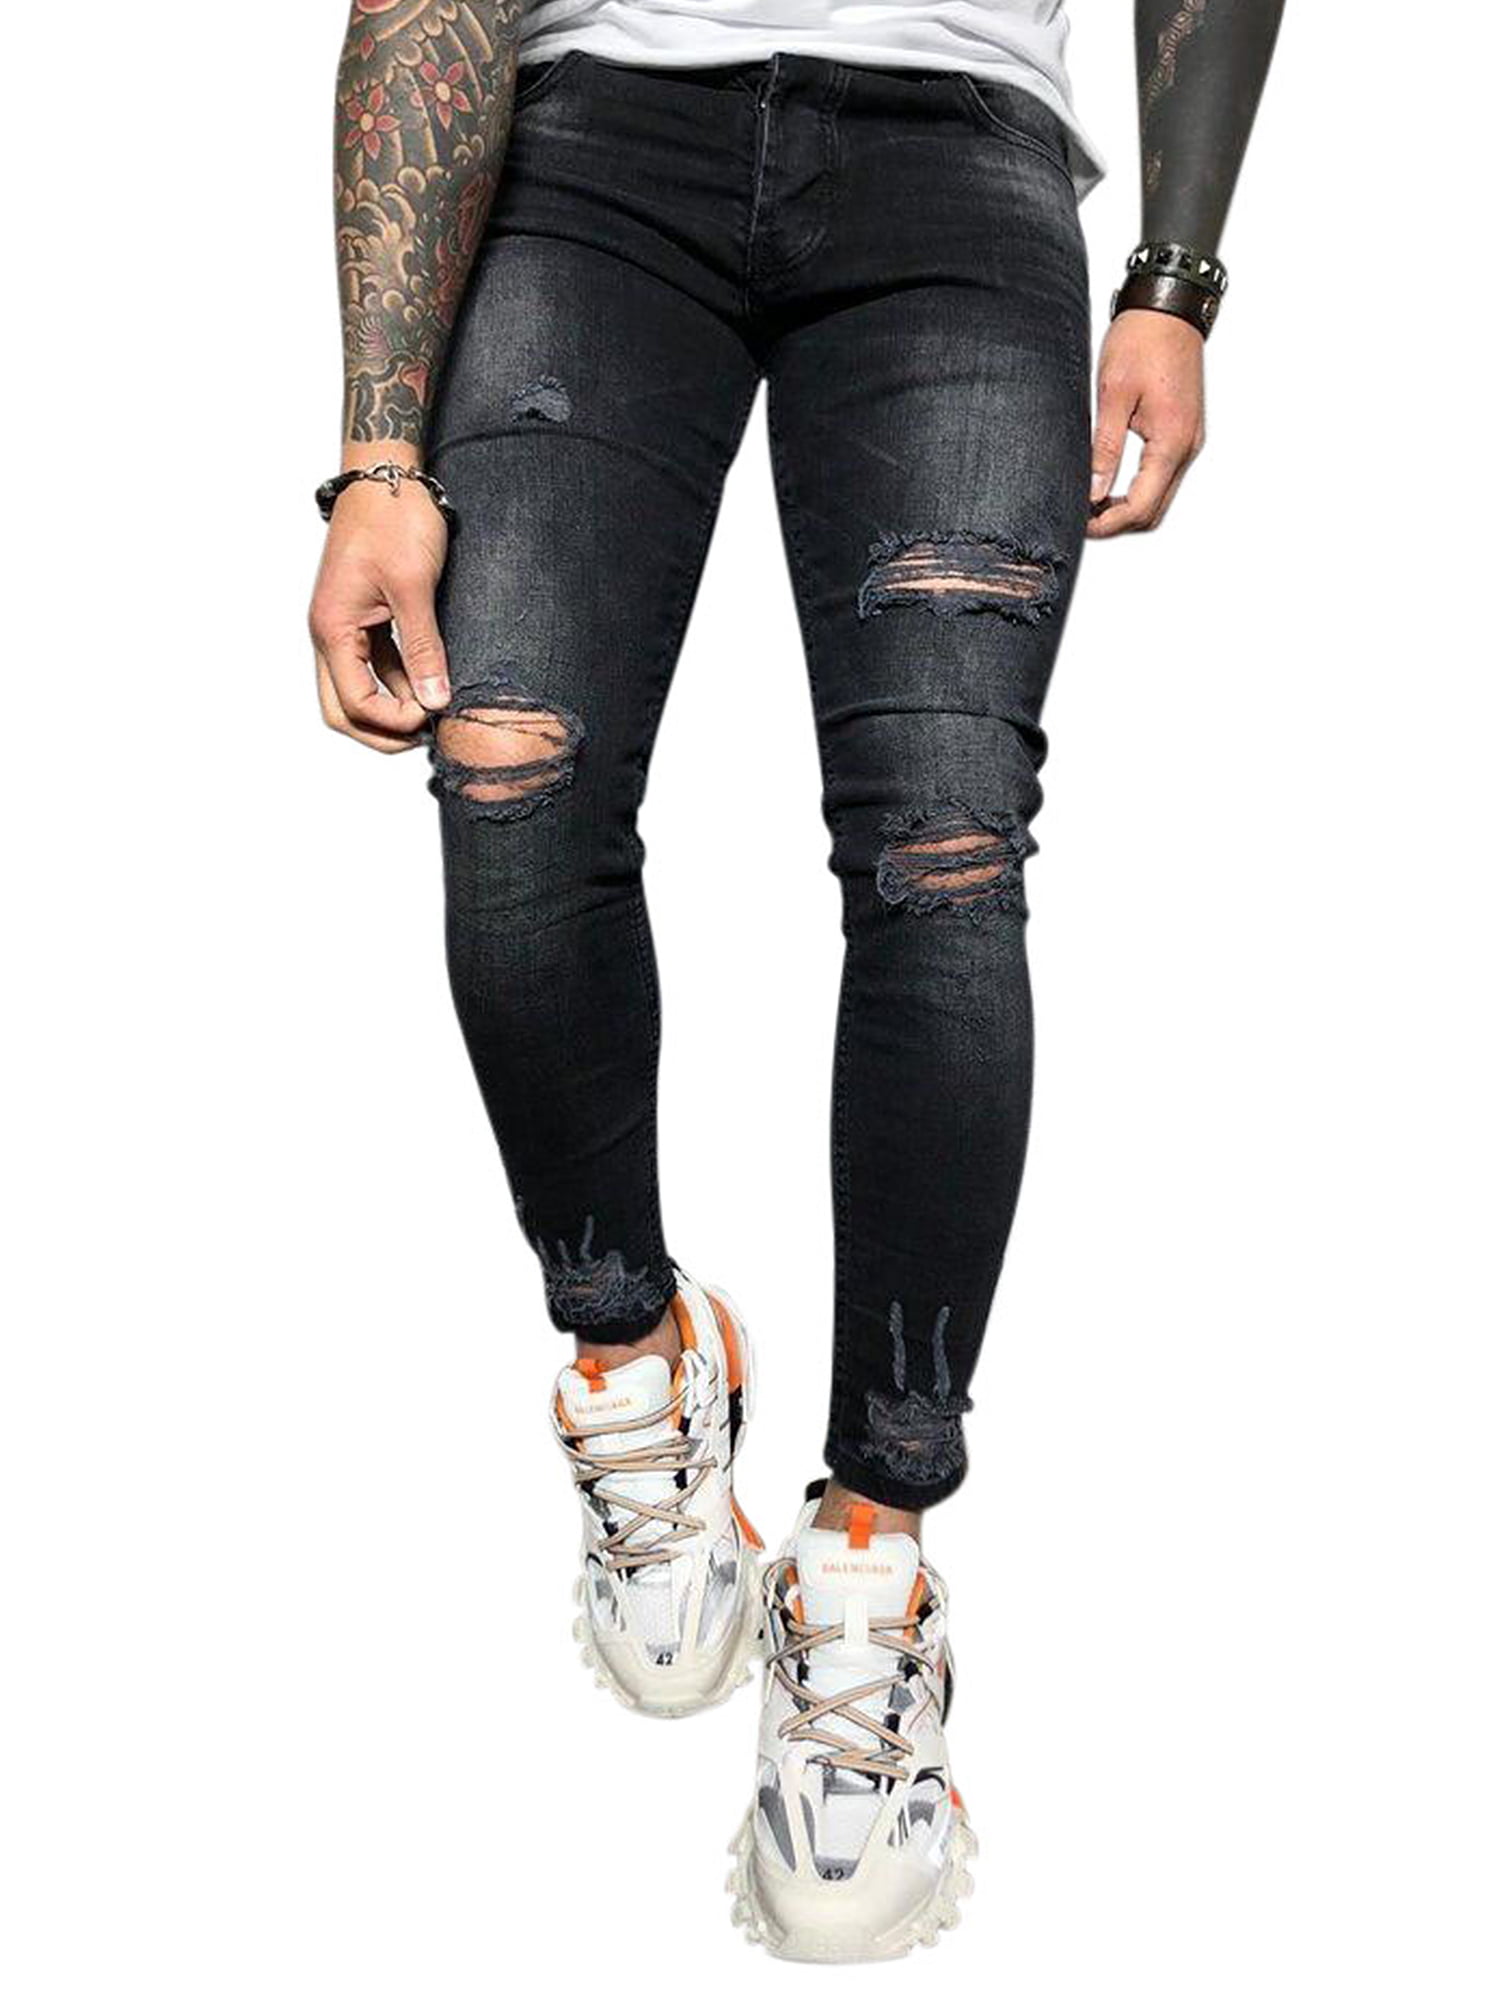 Mens Stretchy Jeans Ripped Skinny Jeans Destroyed Frayed Slim Fit Denim Pants